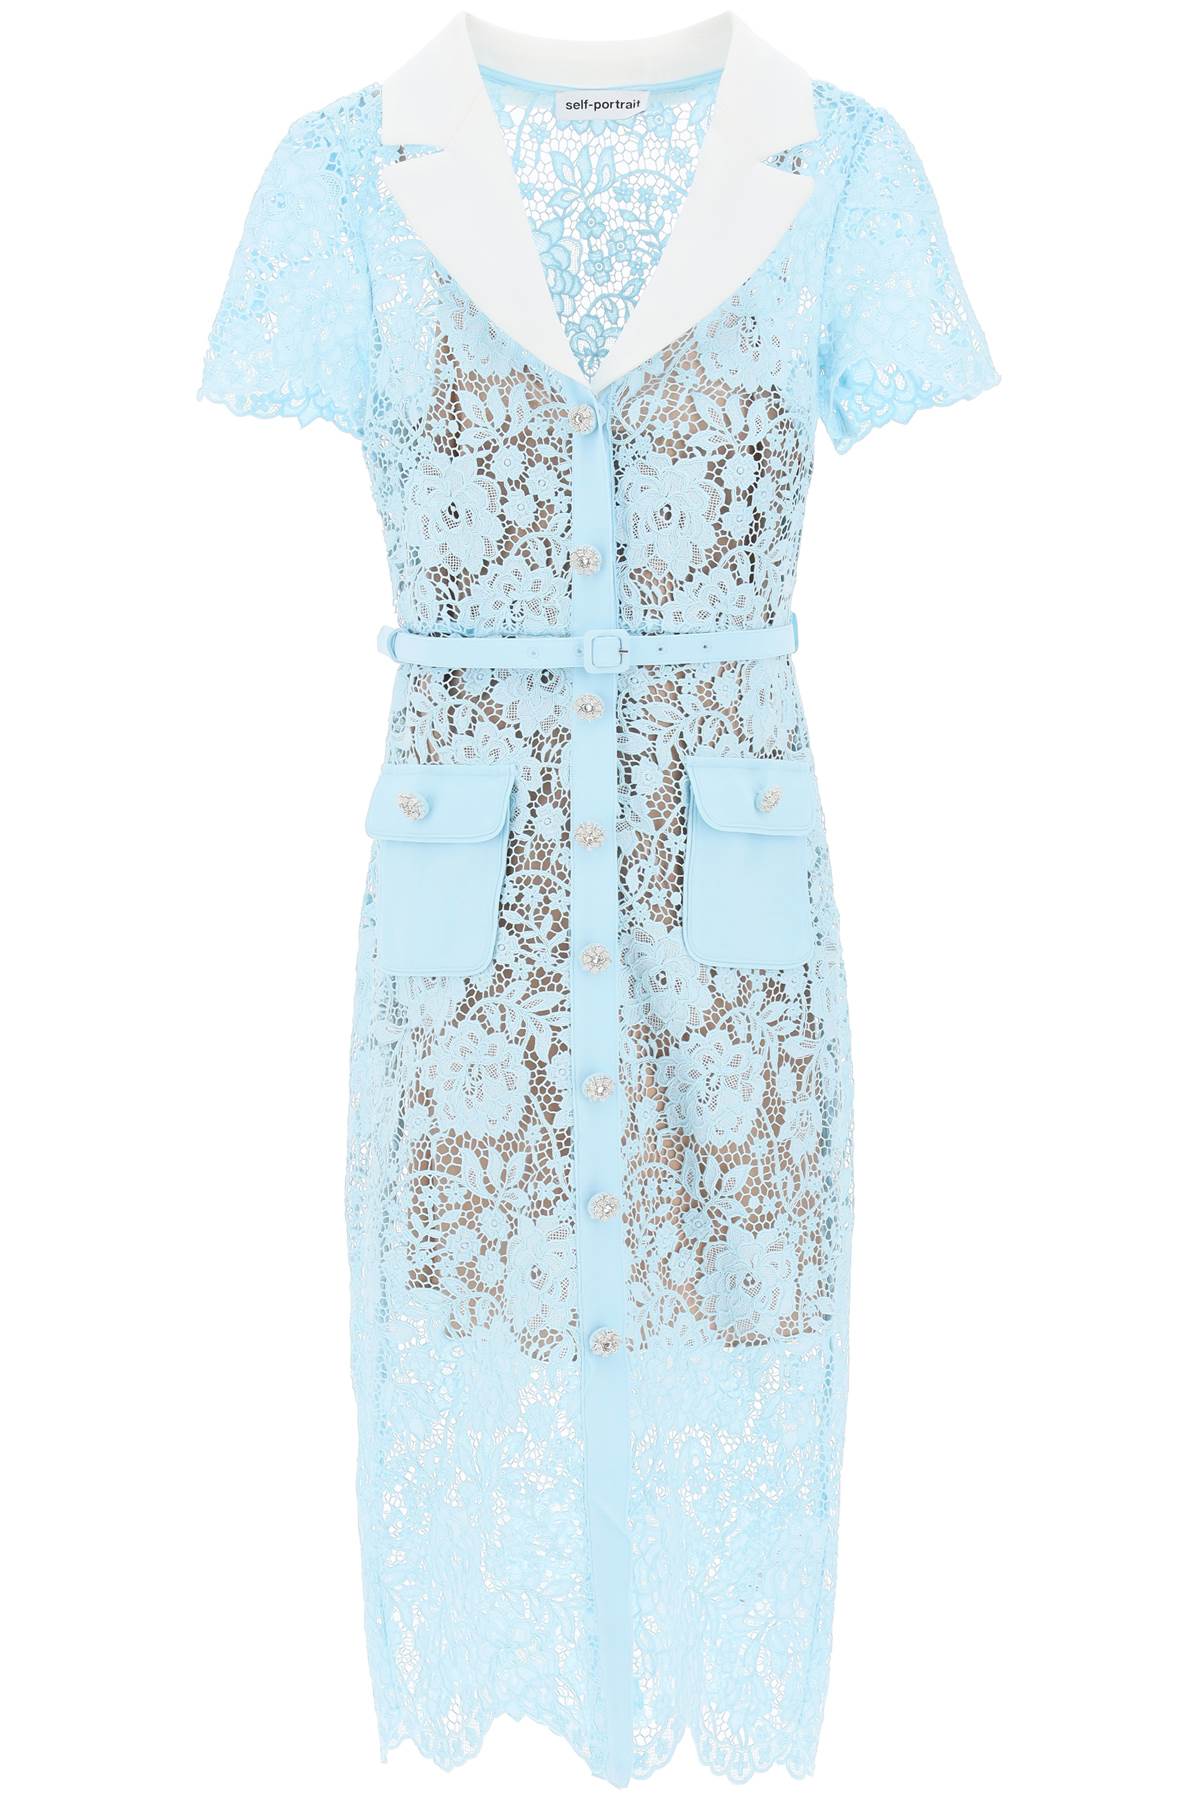 self-portrait Midi Dress In Floral Lace With Contrasting Lapel And Jewel Buttons